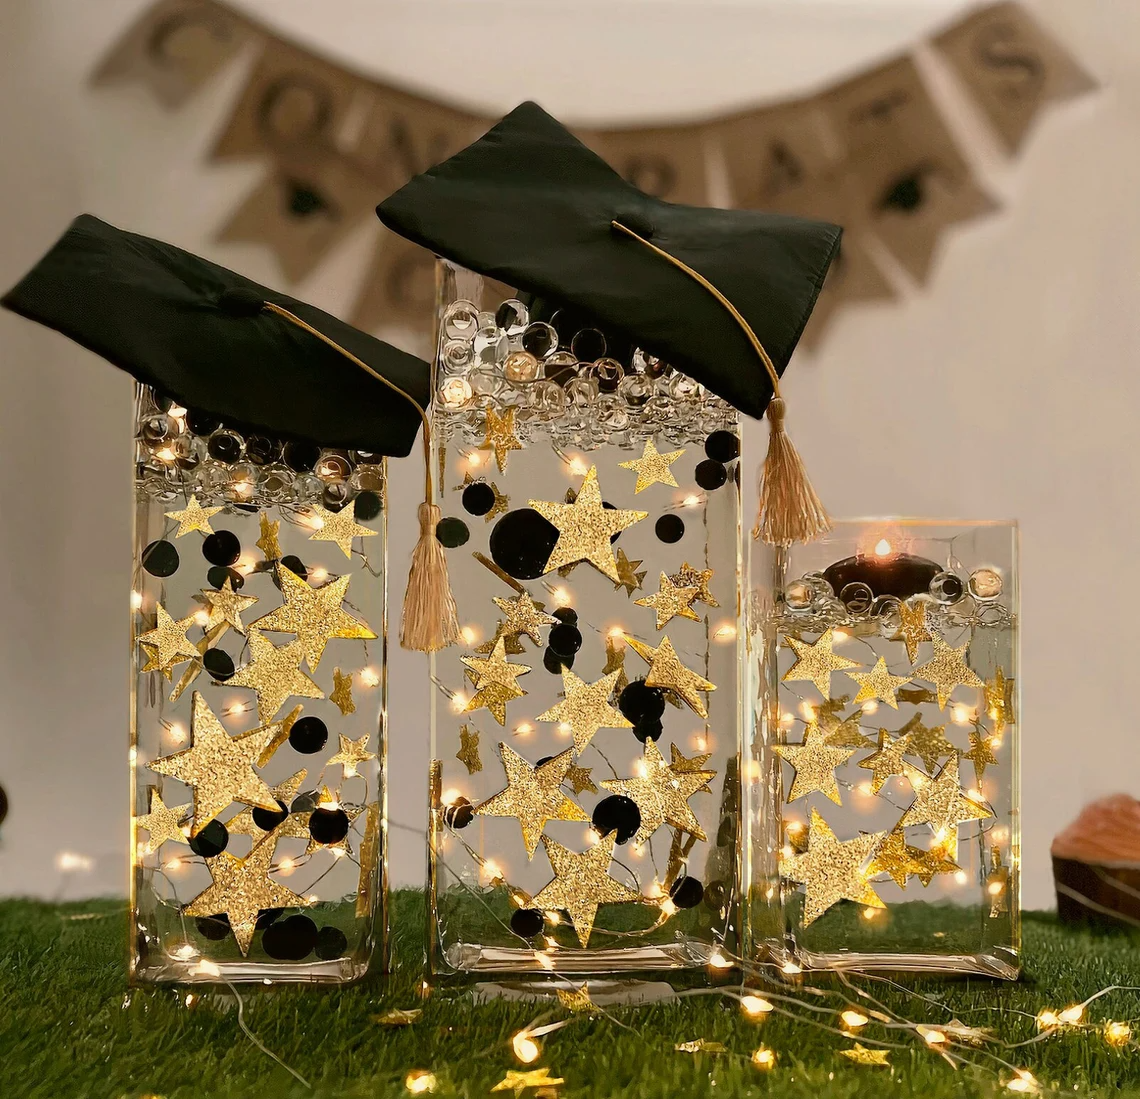 Floating Stars Glitter Gold-Large Sizes-Fills 1 GL for Your Vases-Including Transparent Water Gels Kits for Floating Look-Option of Submersible Fairy Lights-Stunning Vase Decorations